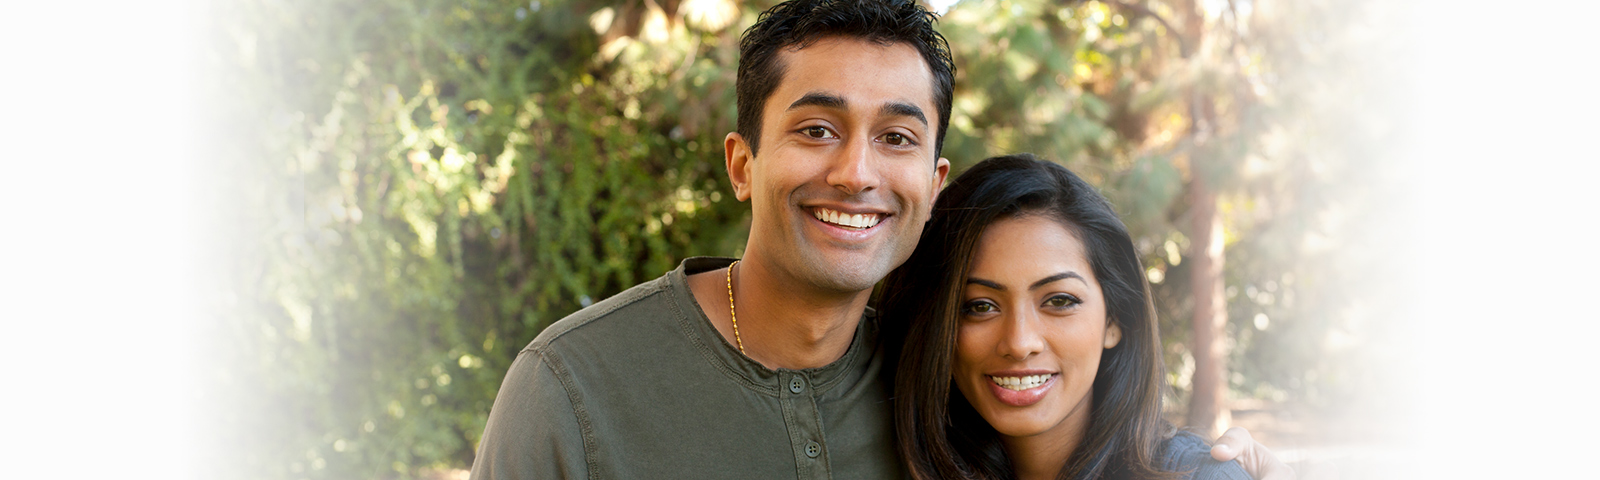 indian couple smiling together